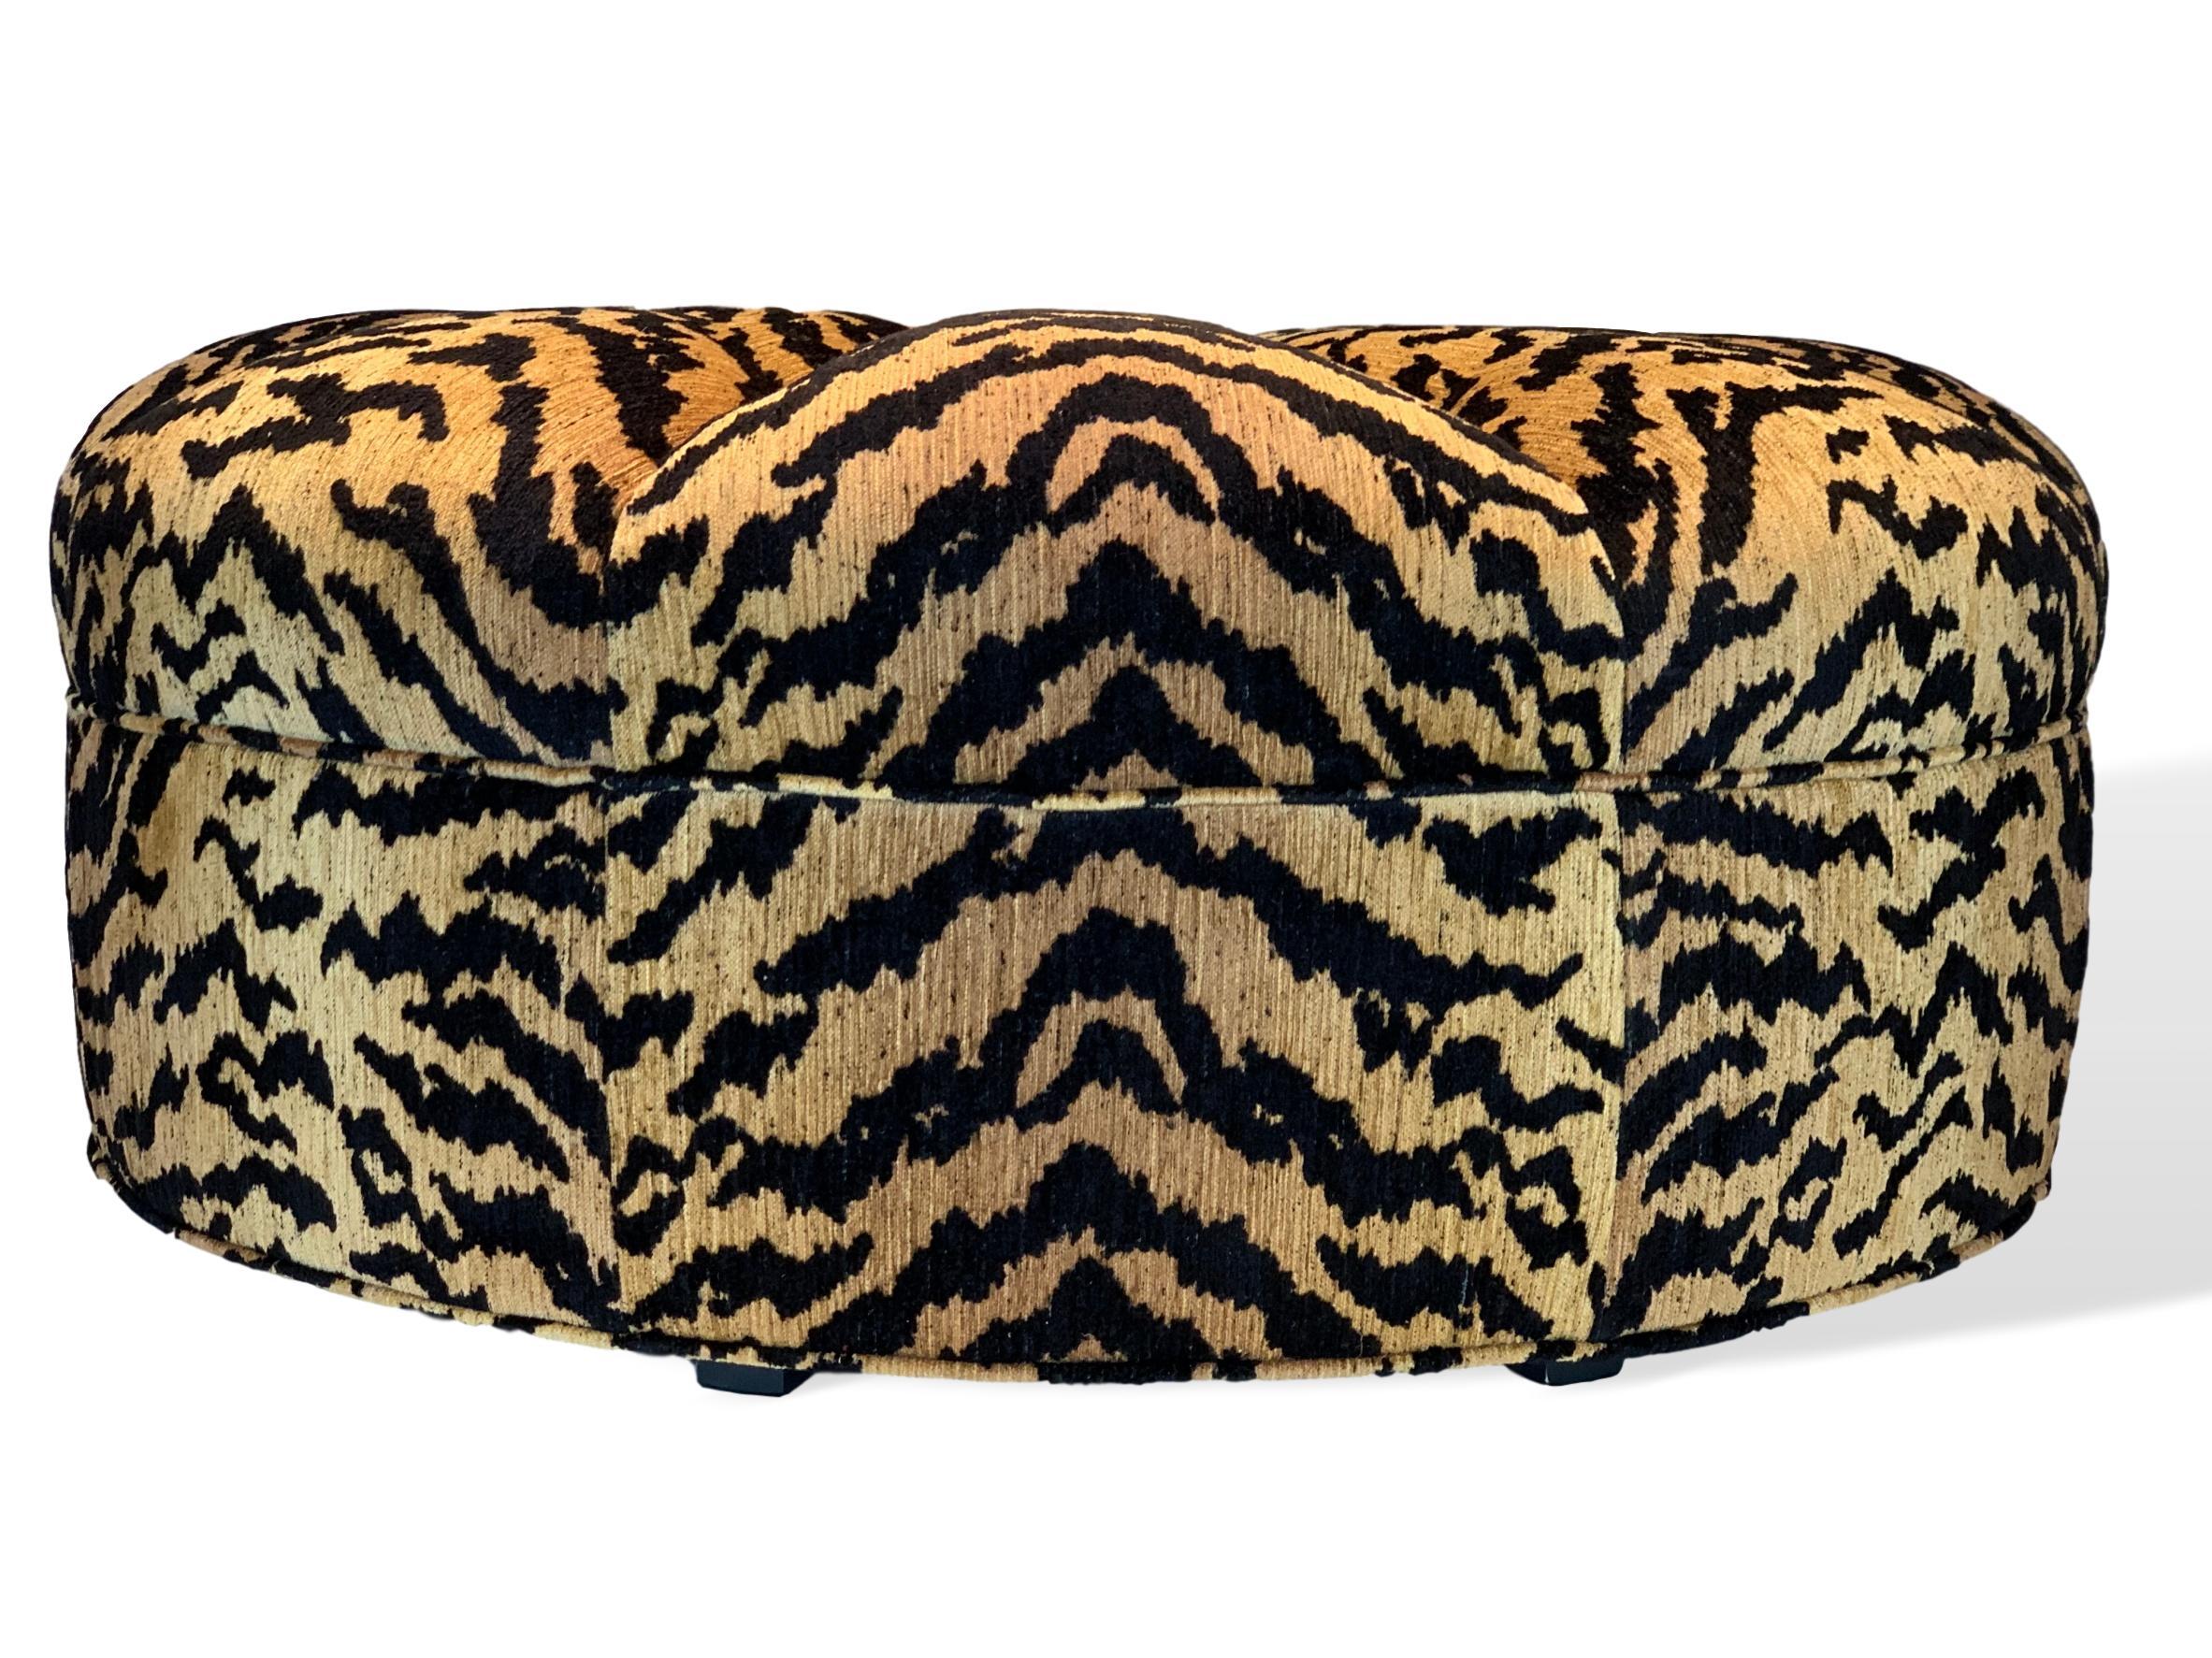 Large 41-inch circular ottoman in Italian designer ultra high-end silky tiger skin woven heavy cut and uncut chenille; the hand of the fabric is unexpectedly soft and luxurious. Ottoman was recently handcrafted and upholstered from new materials and